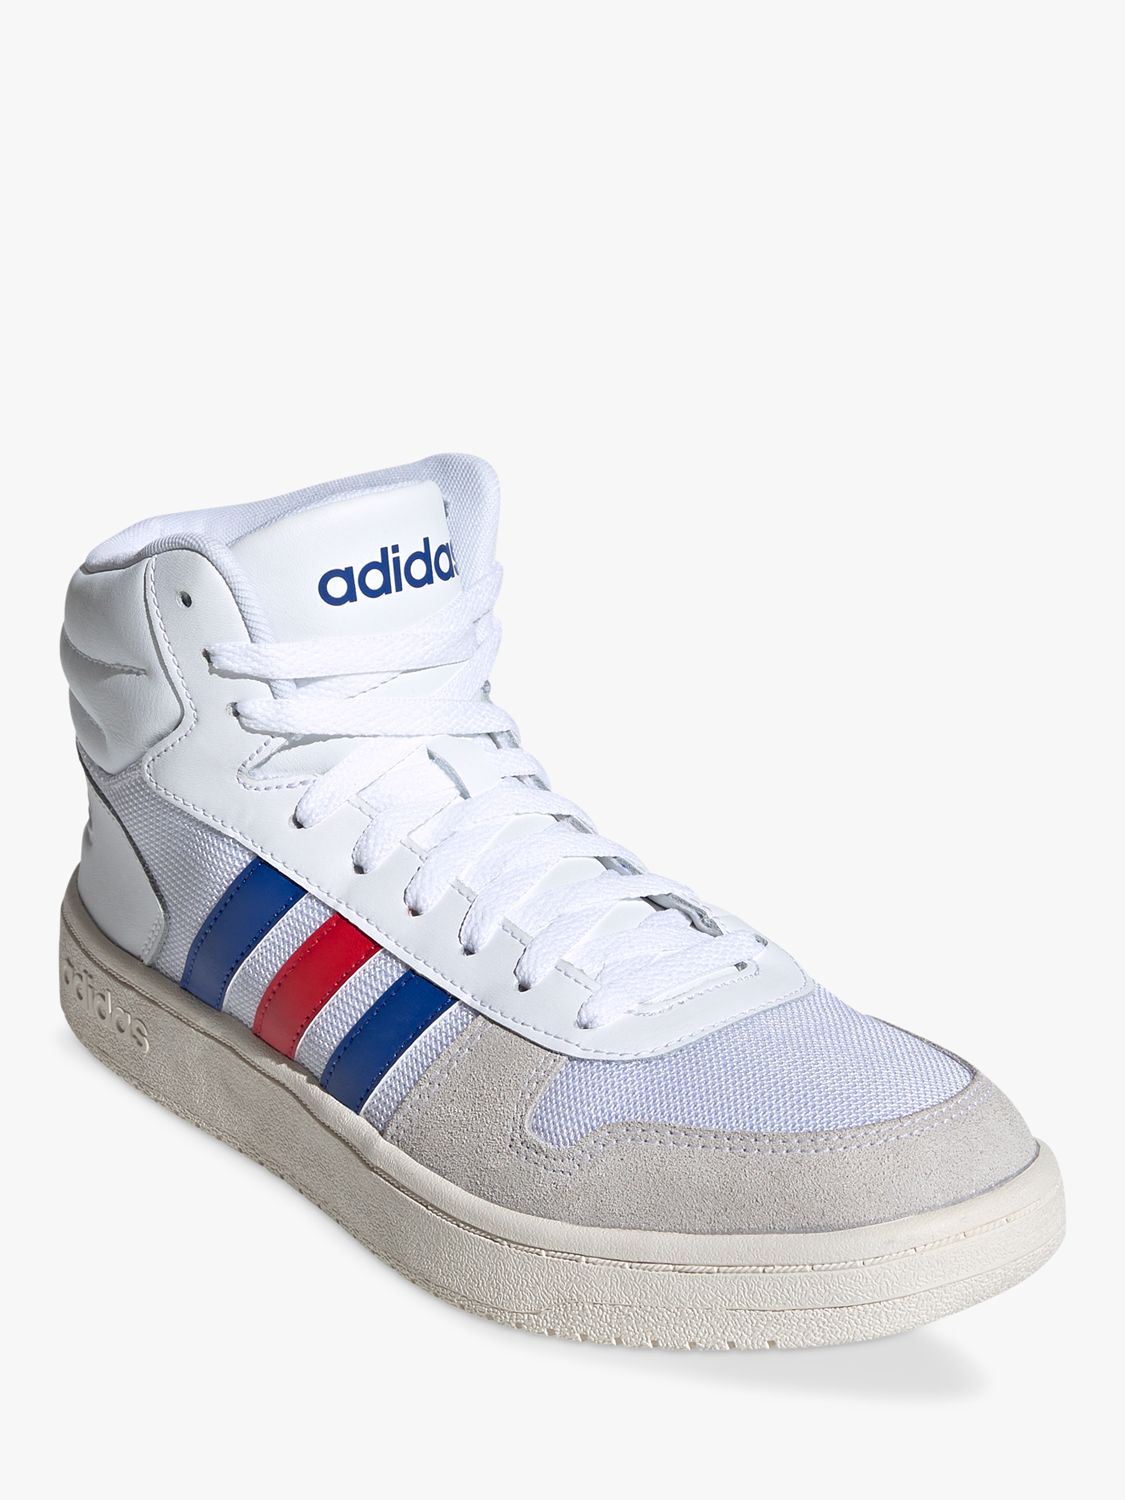 white adidas shoes high tops